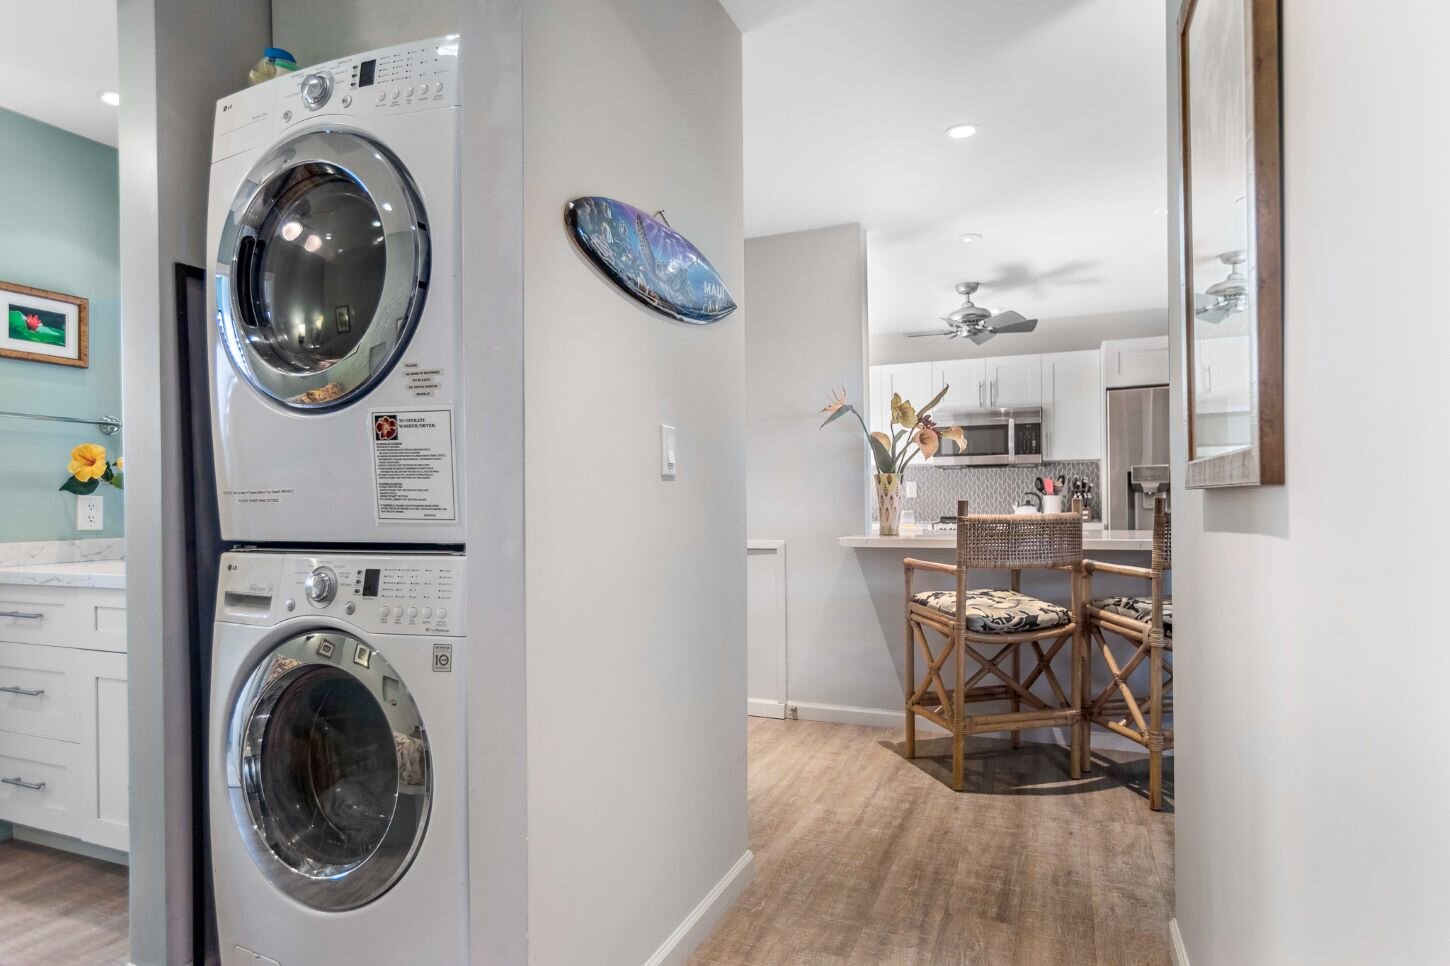 Full LG washer and dryer so you can pack less and stay fresh! 